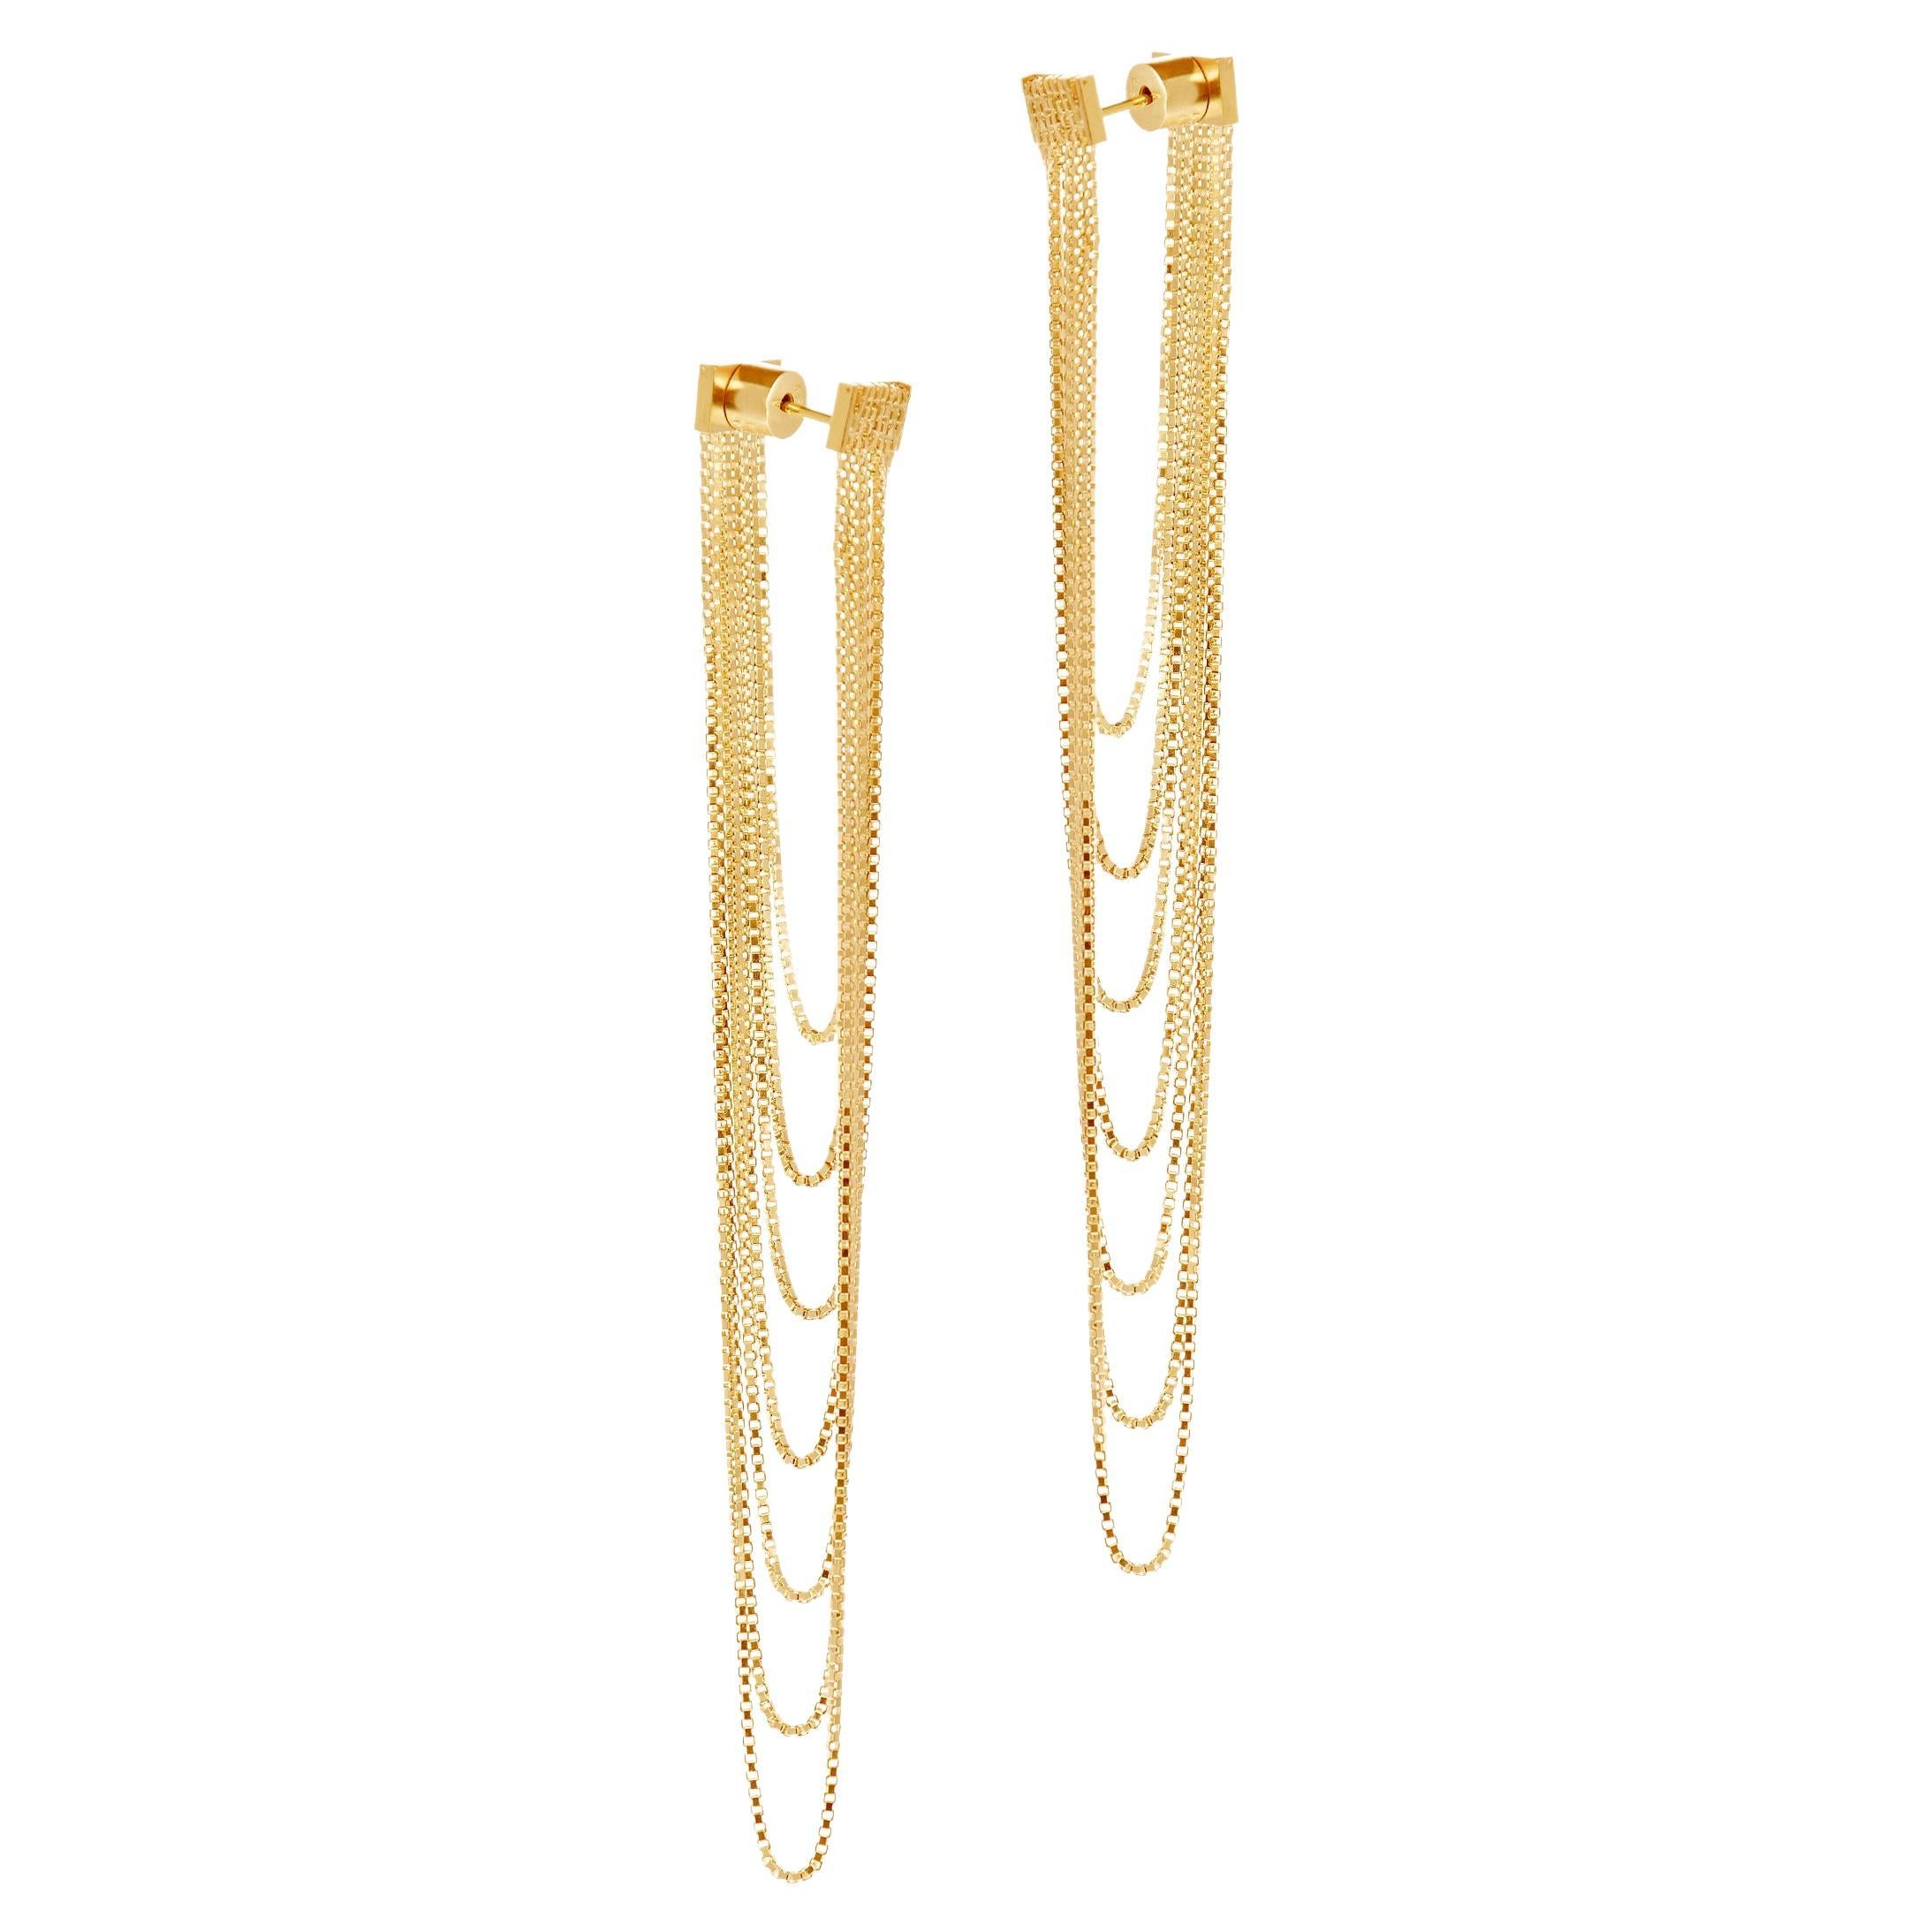 Silver 18k Gold Plated Earrings Box Chain Long Movement Handmade Greek Jewelry For Sale